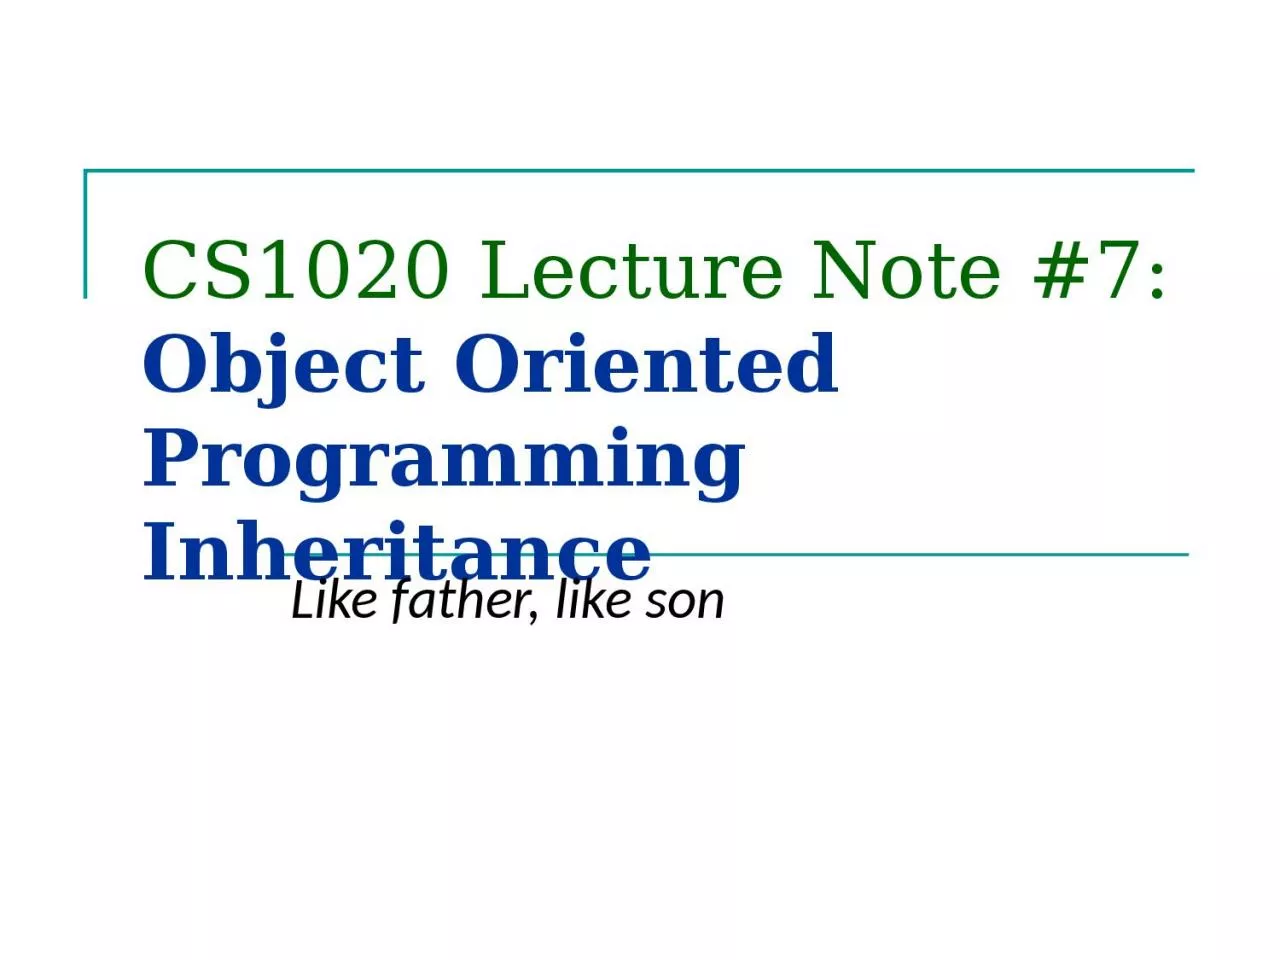 CS1020 Lecture Note #7: Object Oriented Programming Inheritance